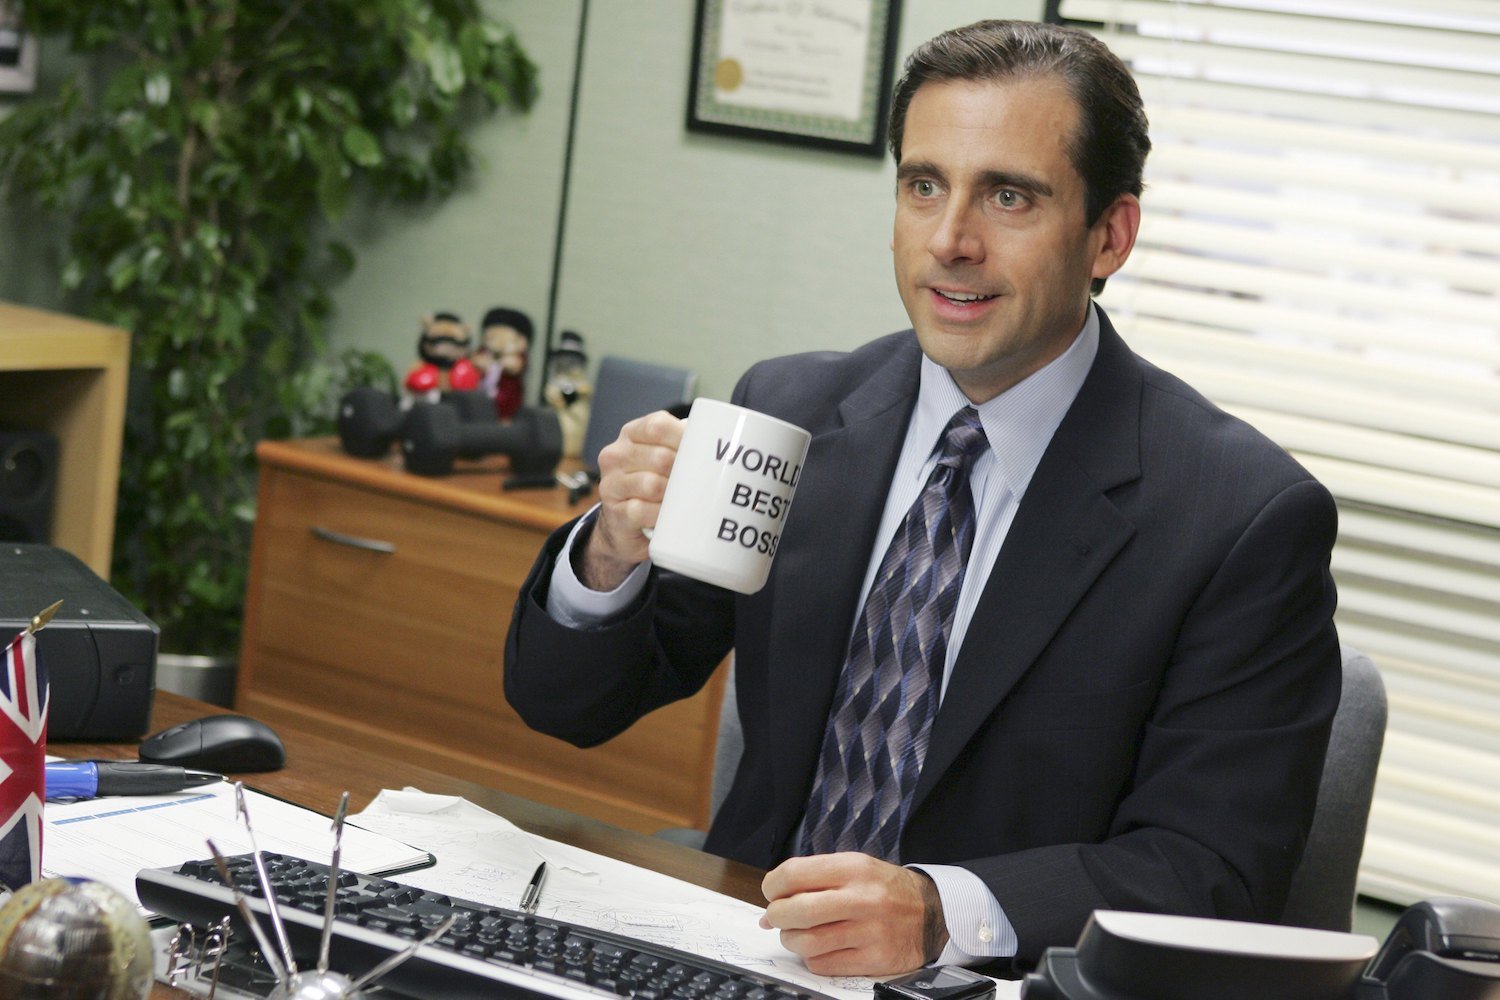 The Office': This Cringey Episode Was Inspired by an Unbelievable Real-Life  Experience